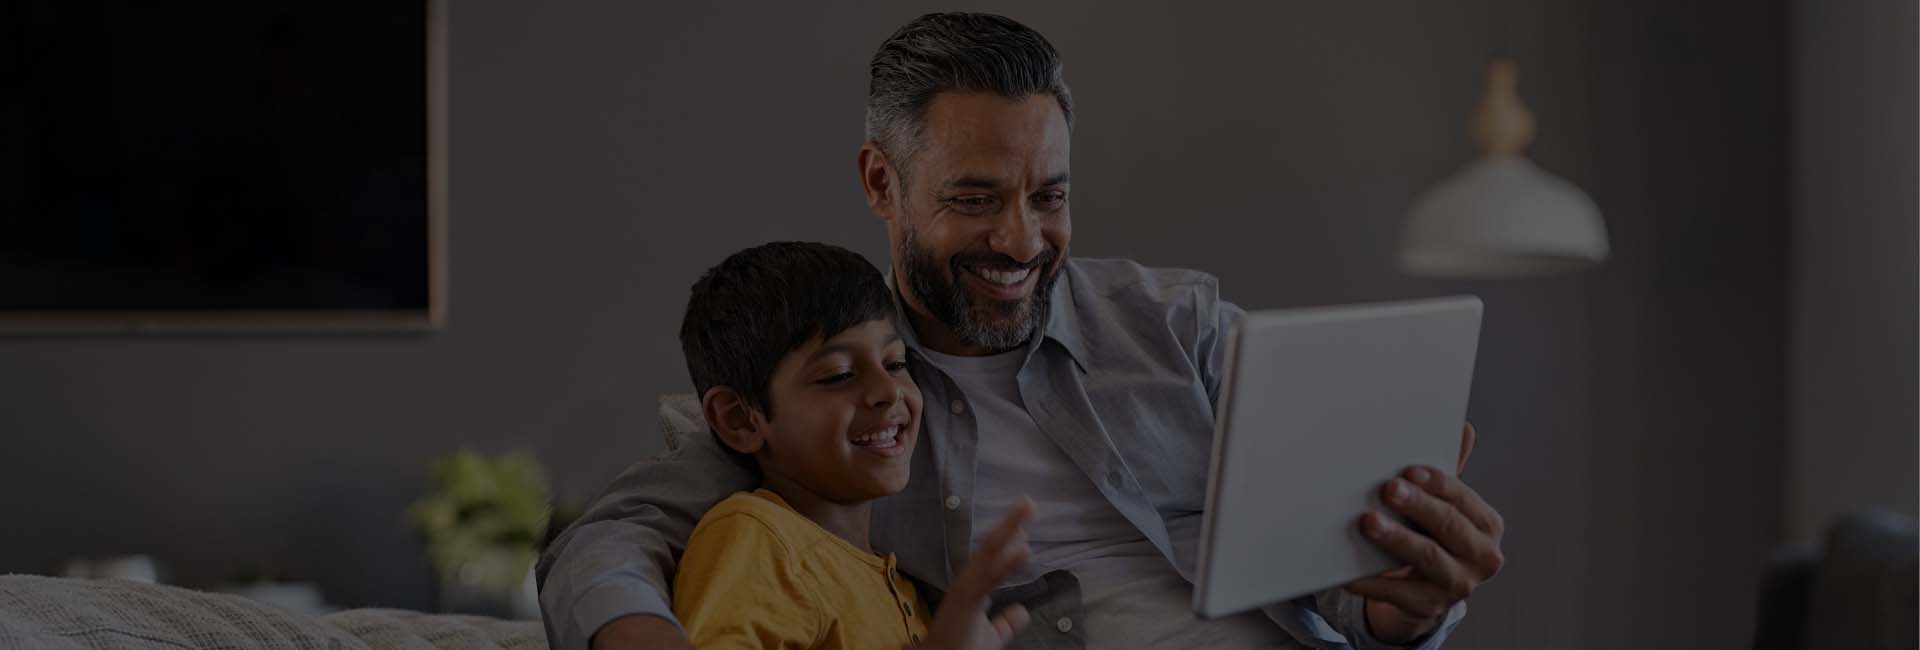 father and son looking at notebook, smiling